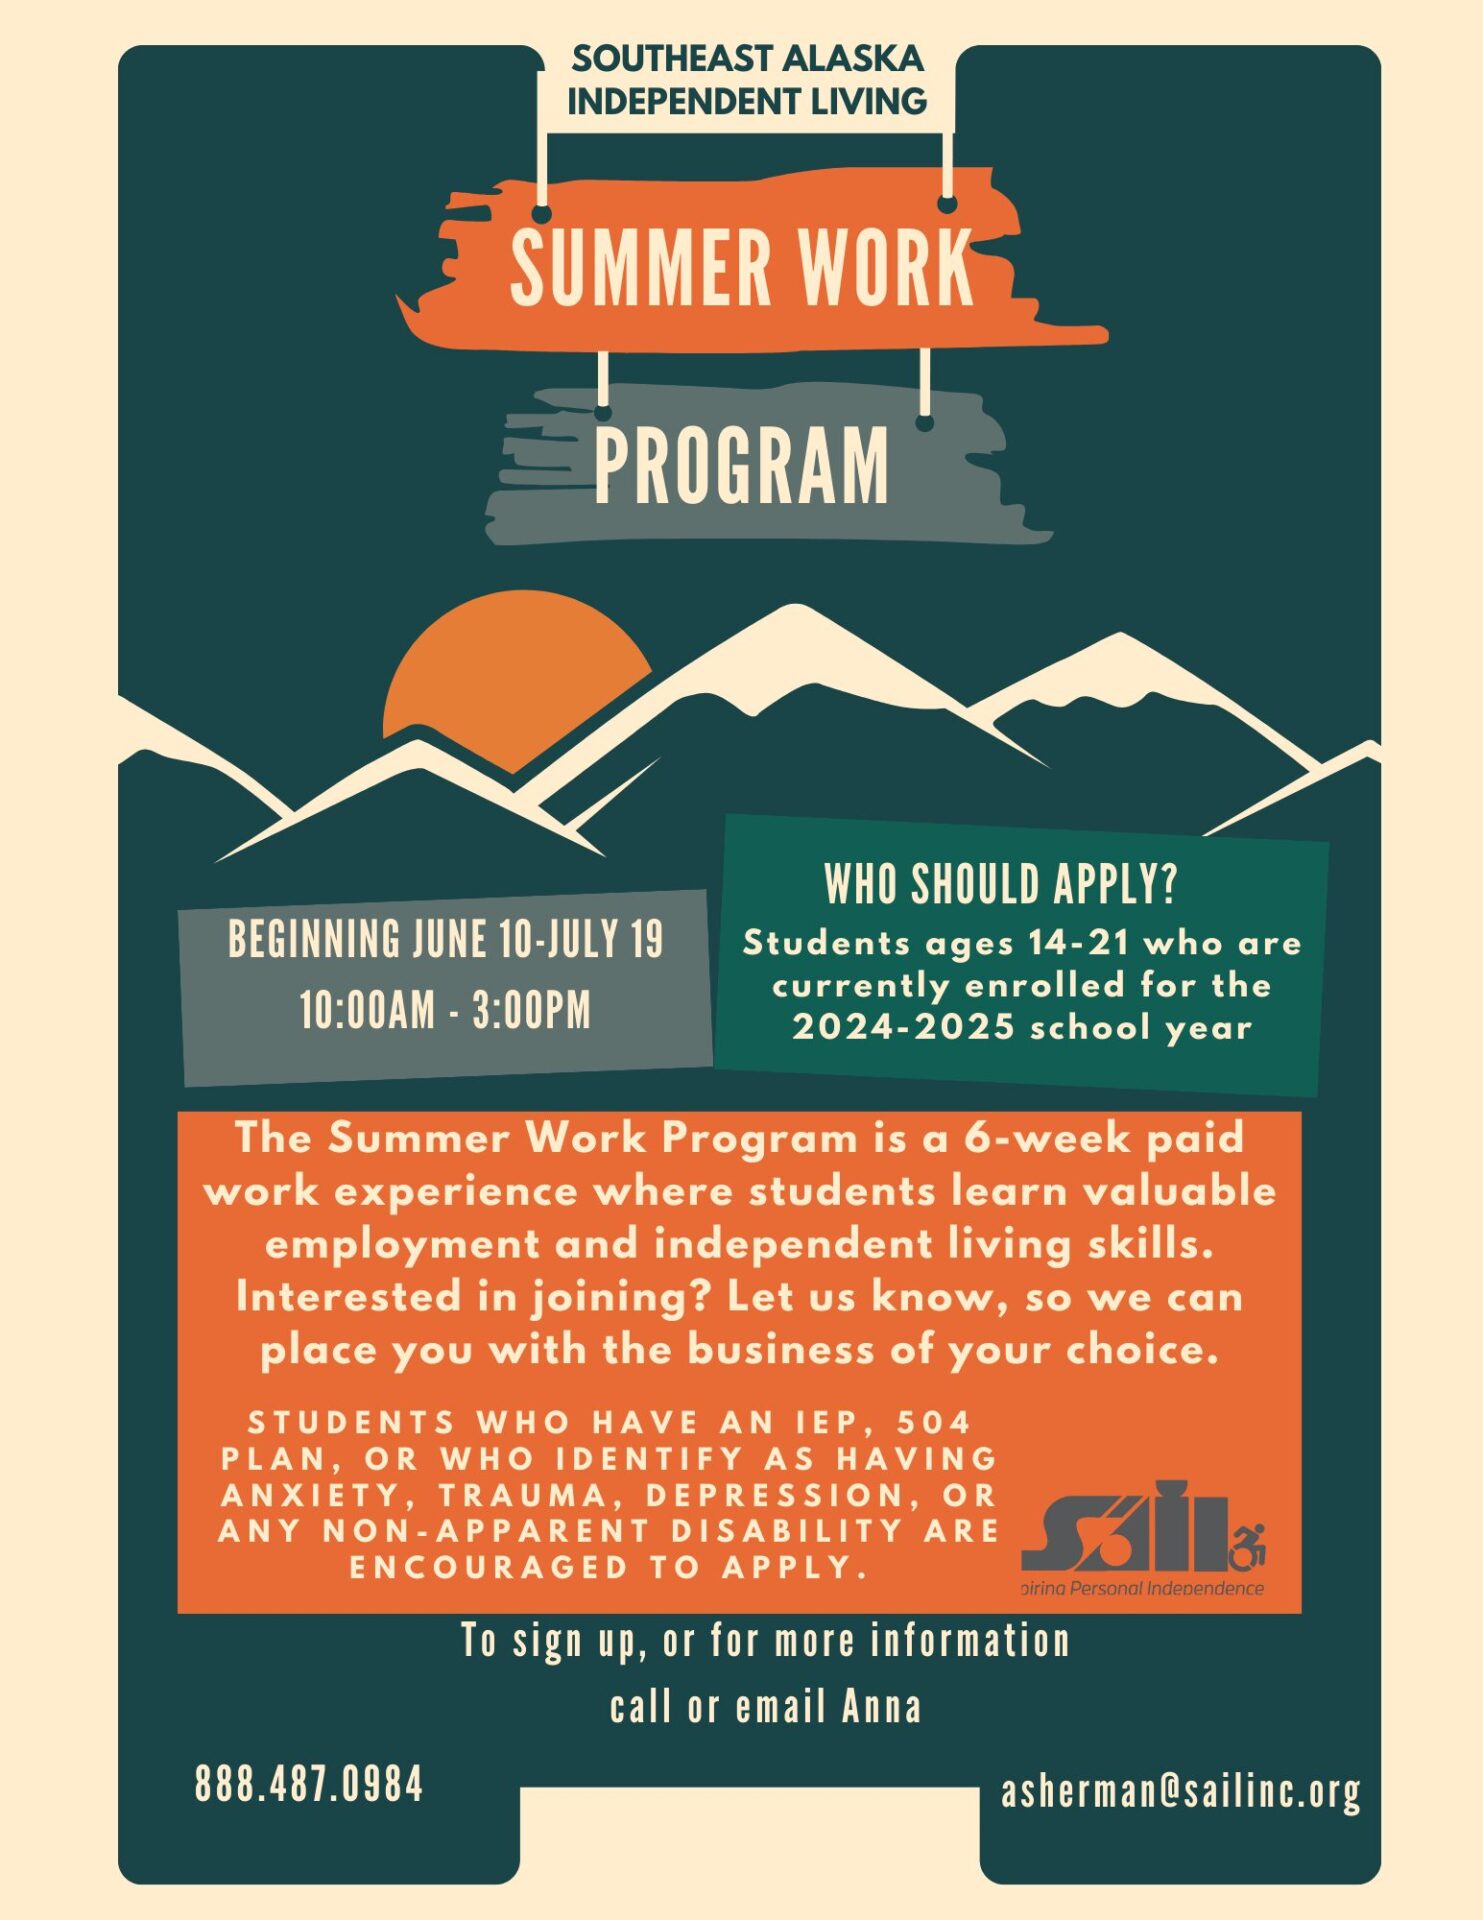 Ketchikan's Summer Work Program Starts Jnue 10-July 19th. Contact Anna Sherman at 888.487.0984. Click on the flyer and complete the form to apply for the program. 